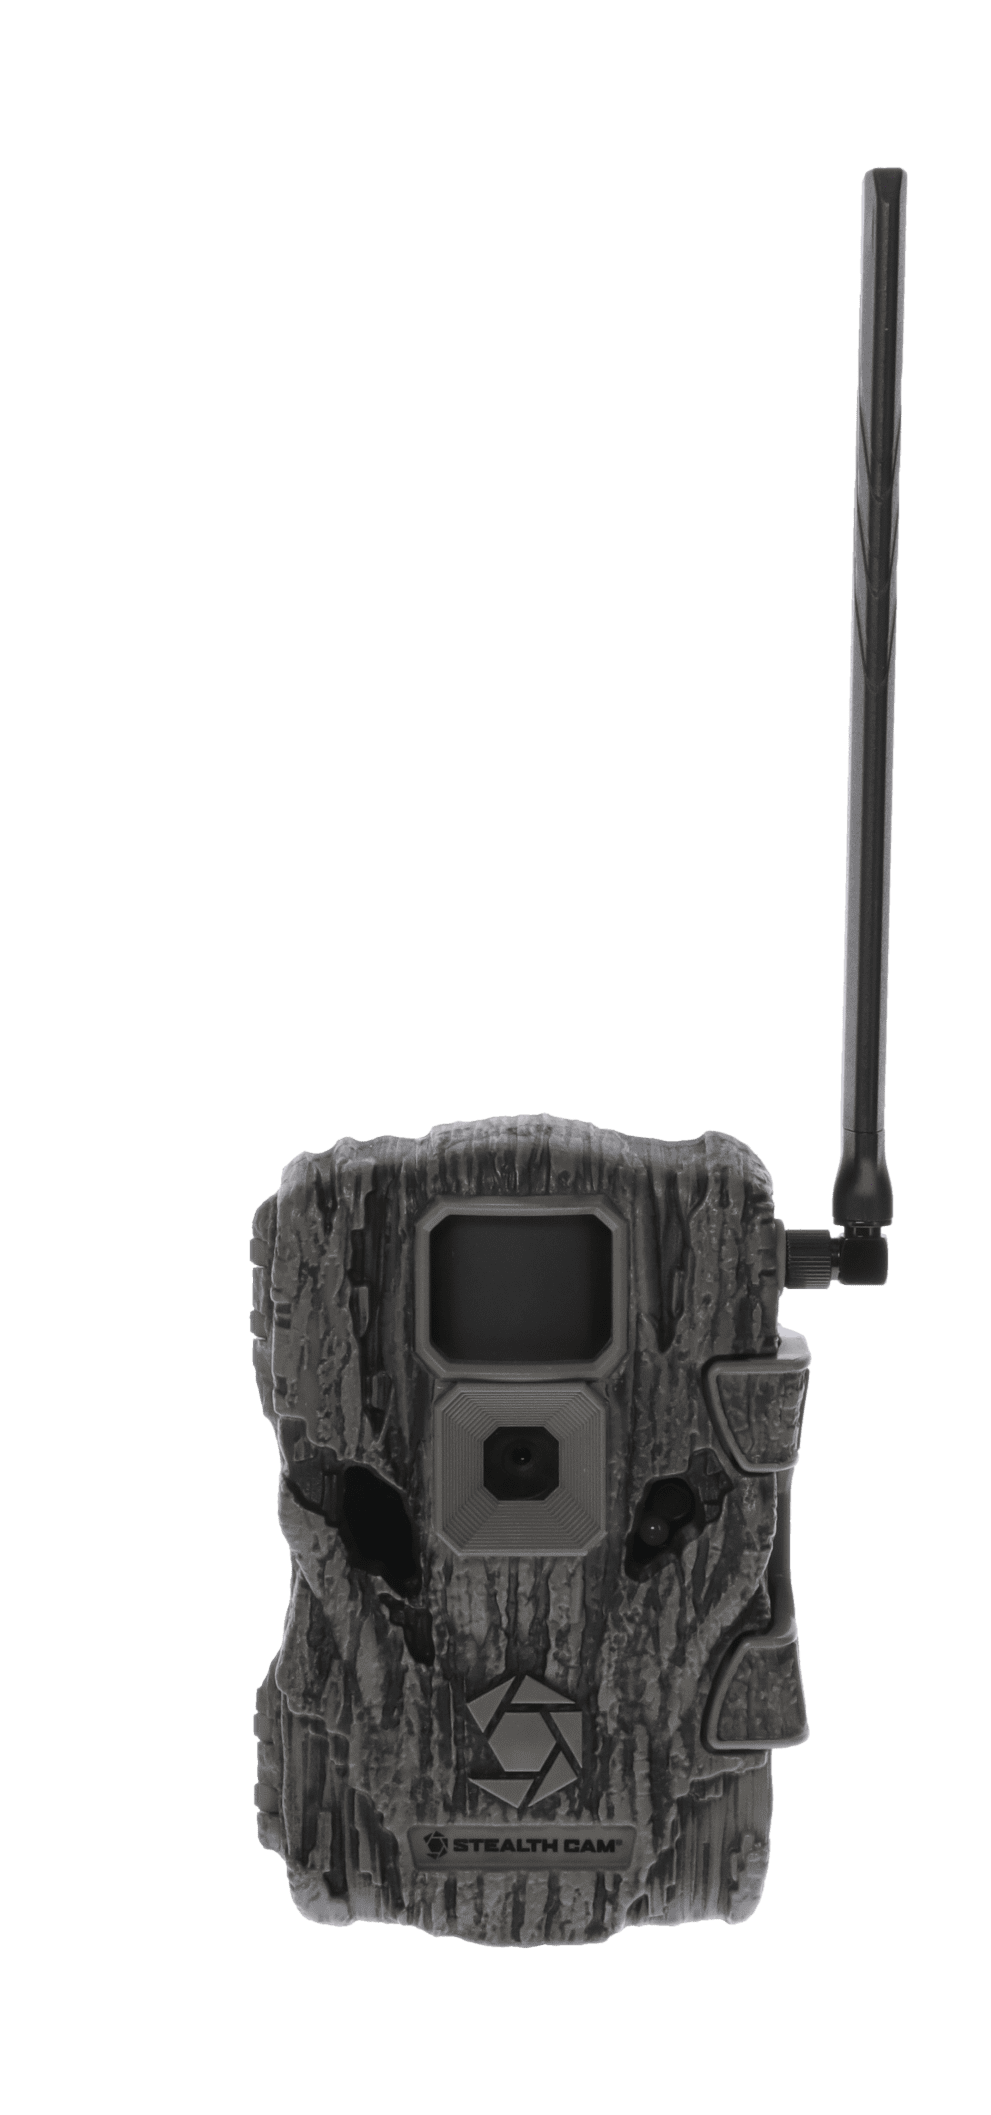 Stealth Cam STC-FATW Stealth Cam Fusion Wireless Camera for sale online 